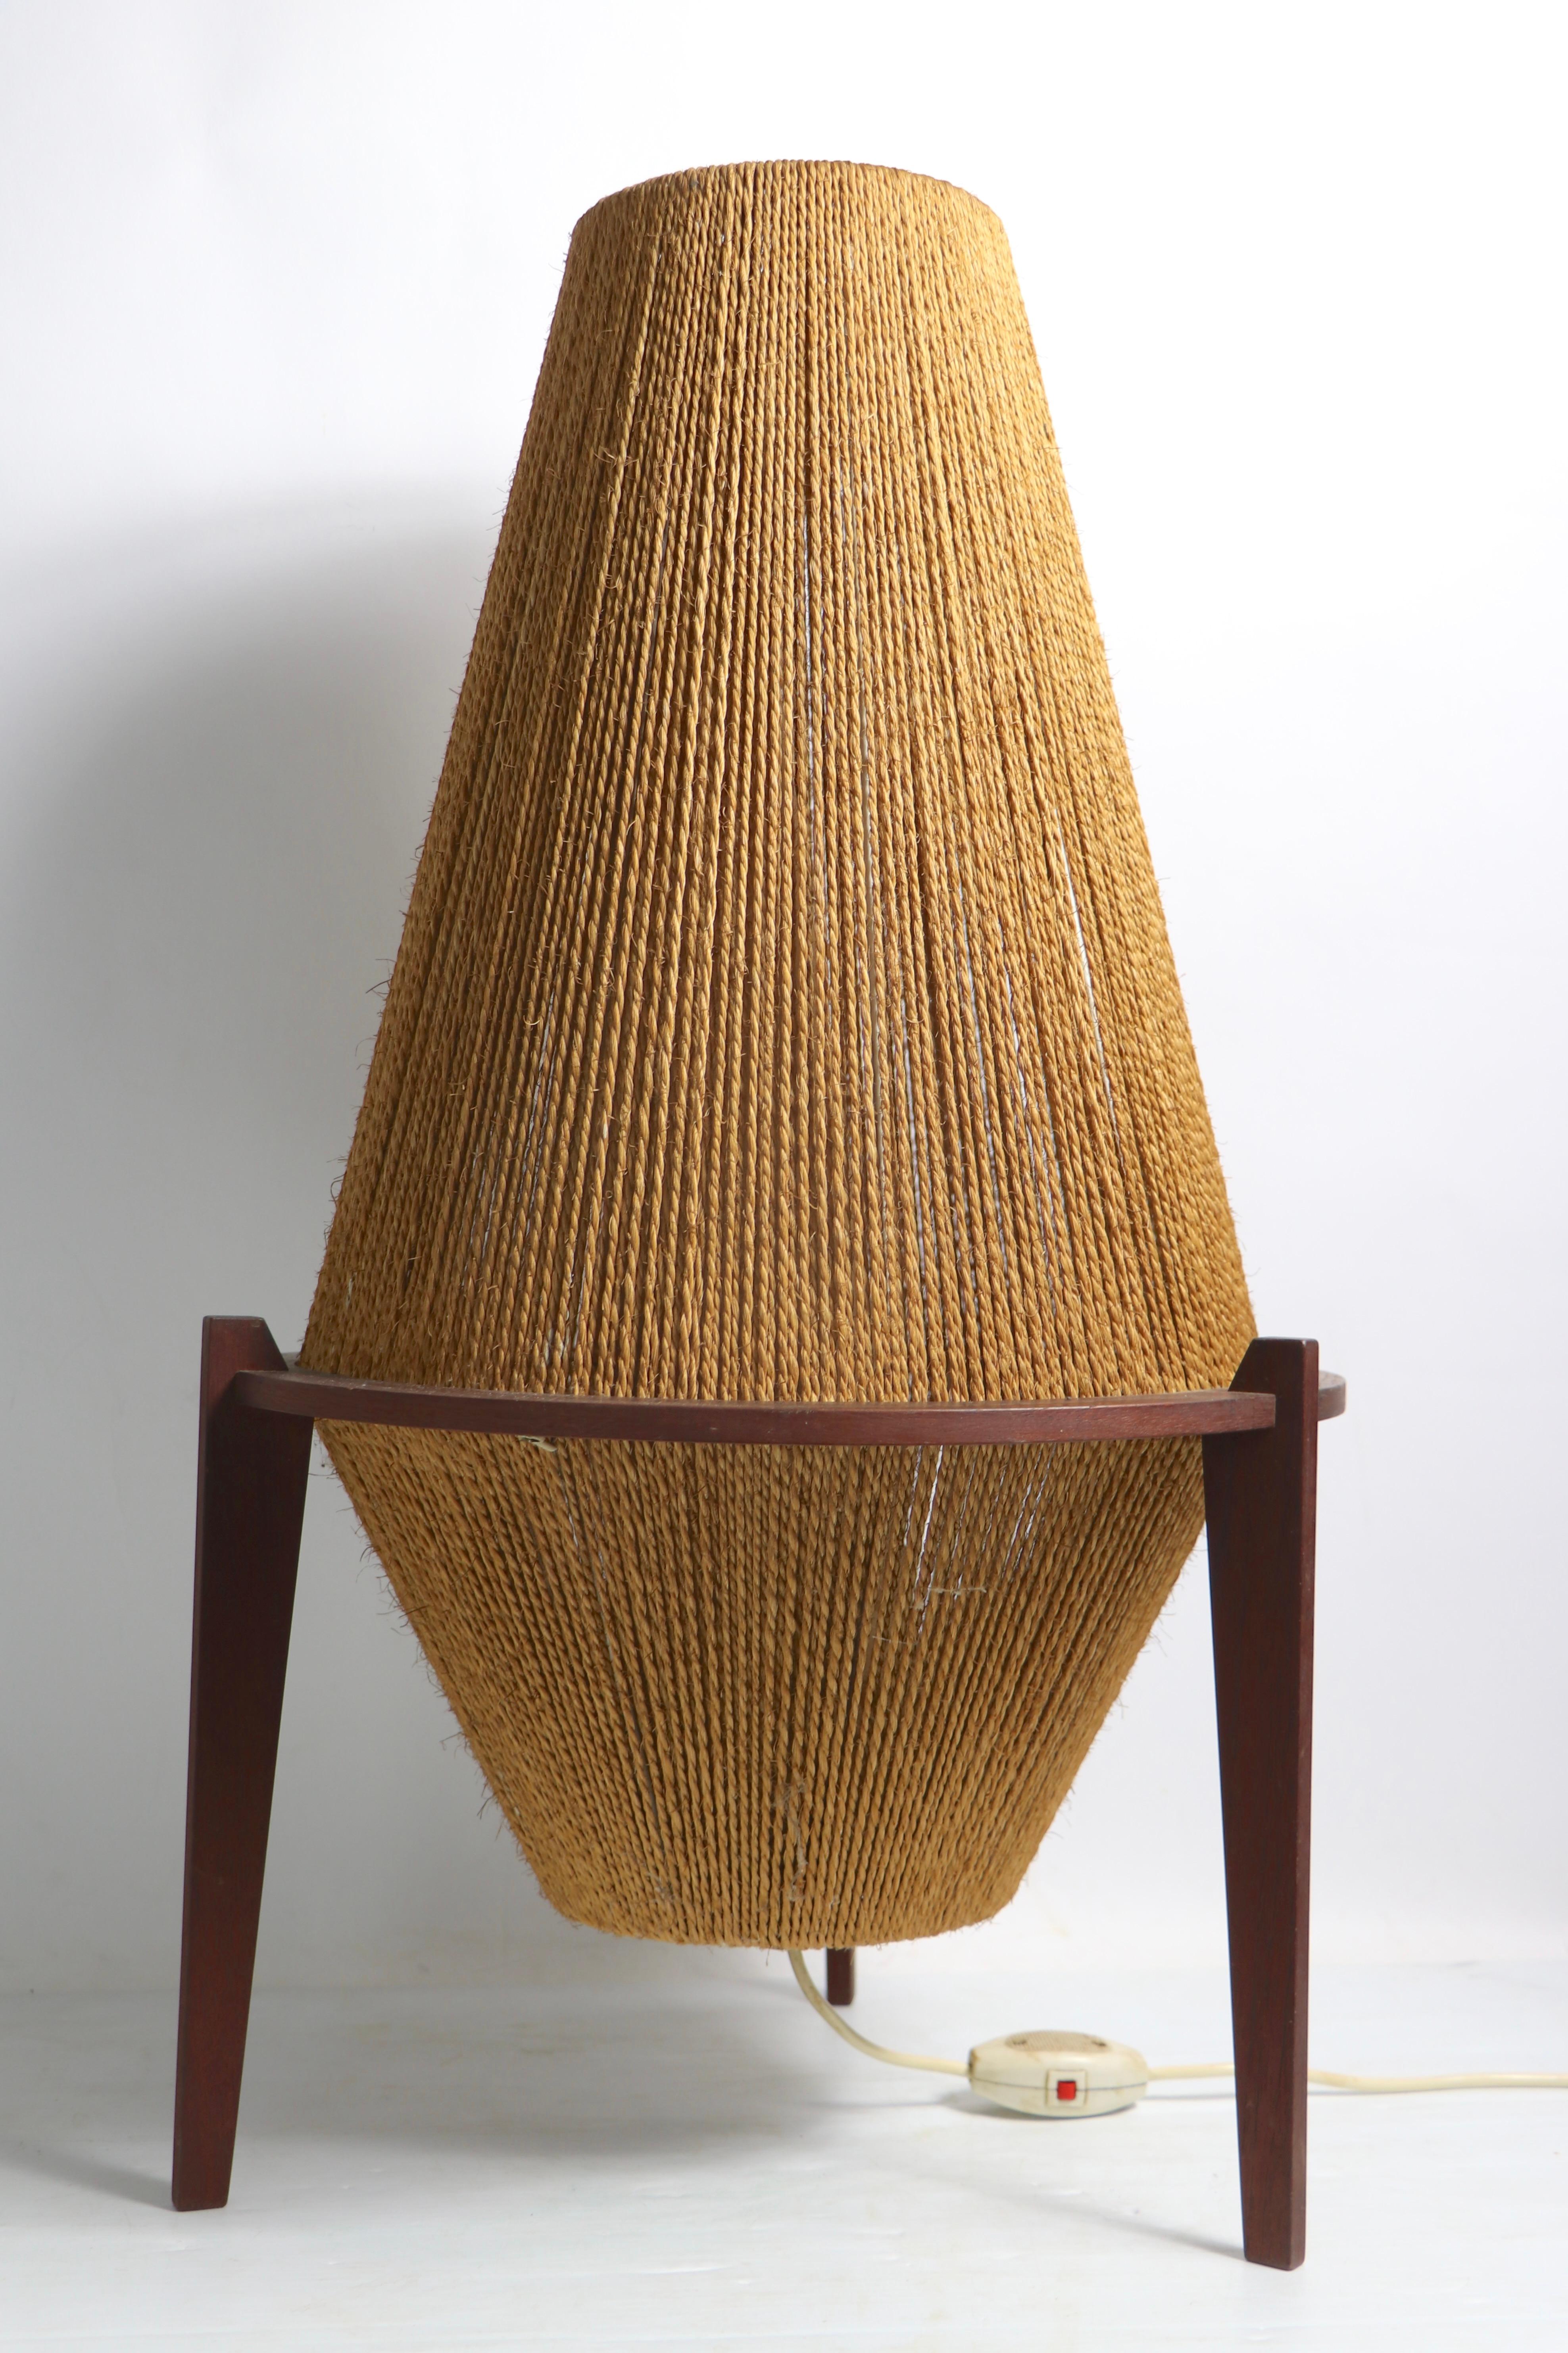 Danish Mid Century String Lamp by I B Fabiasen for Fog and Morup